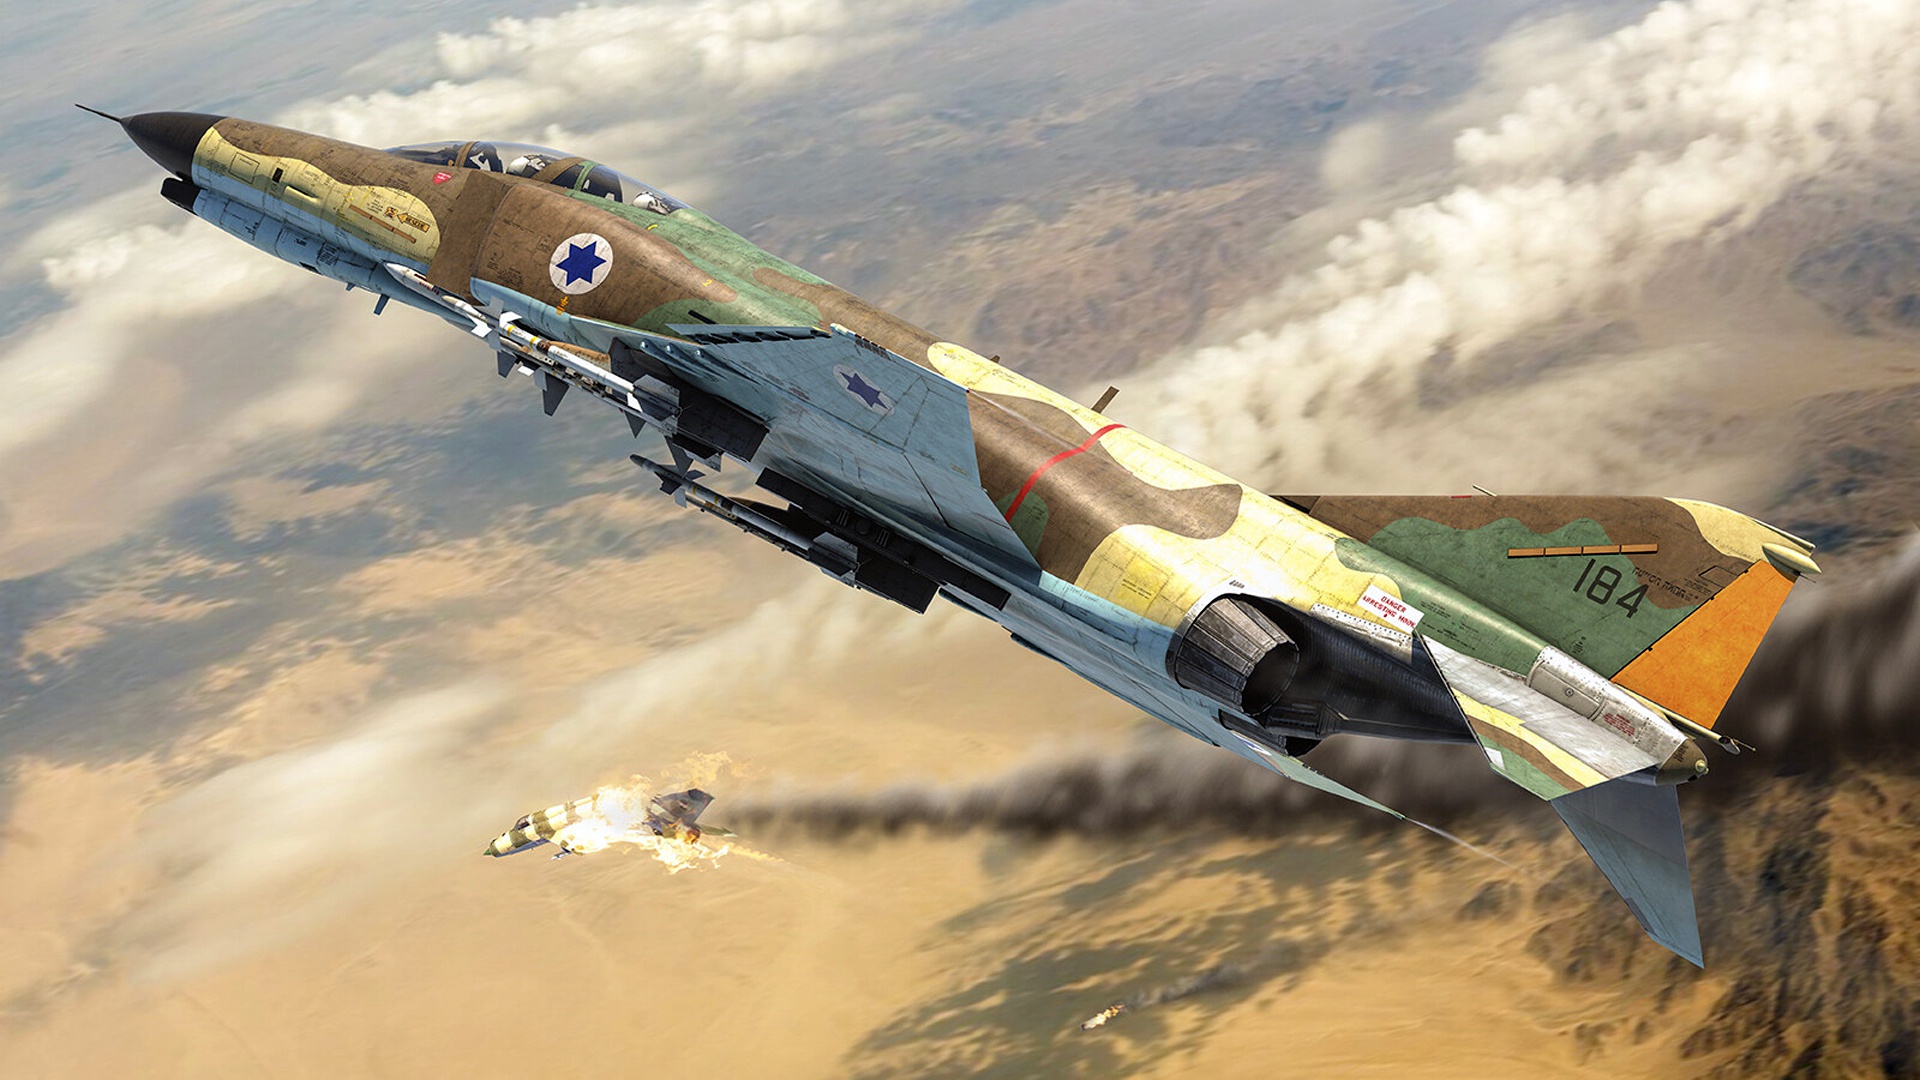 General 1920x1080 aircraft artwork military military aircraft vehicle McDonnell Douglas F-4 Phantom II military vehicle numbers Israel Defense Forces jet fighter Israeli Air Force dogfight digital art Boxart burning fire